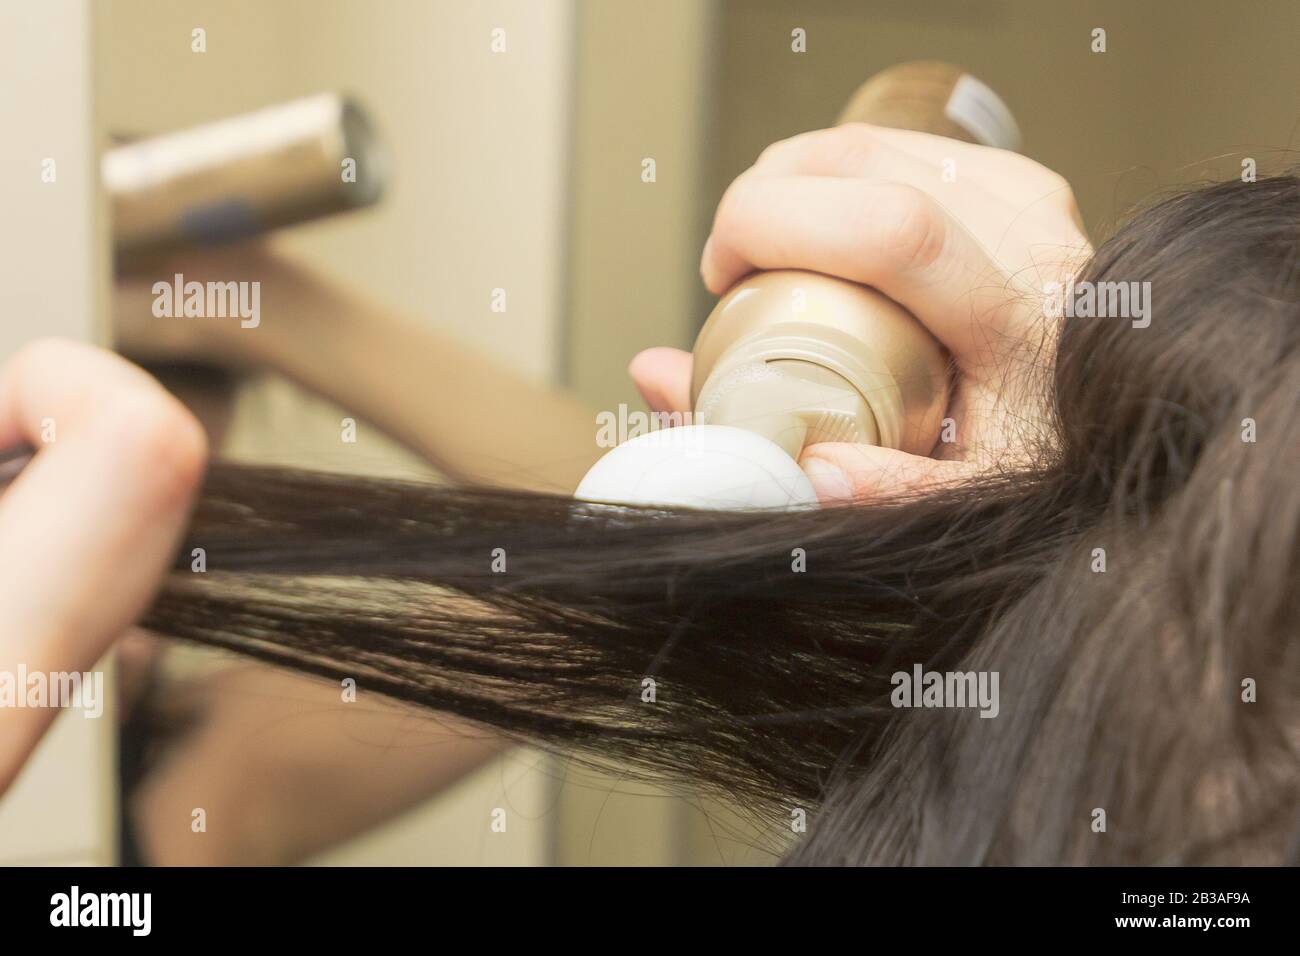 Young women is styling her hair with a foam or mousse. Styling mousse on  the brown long straight hair Stock Photo - Alamy